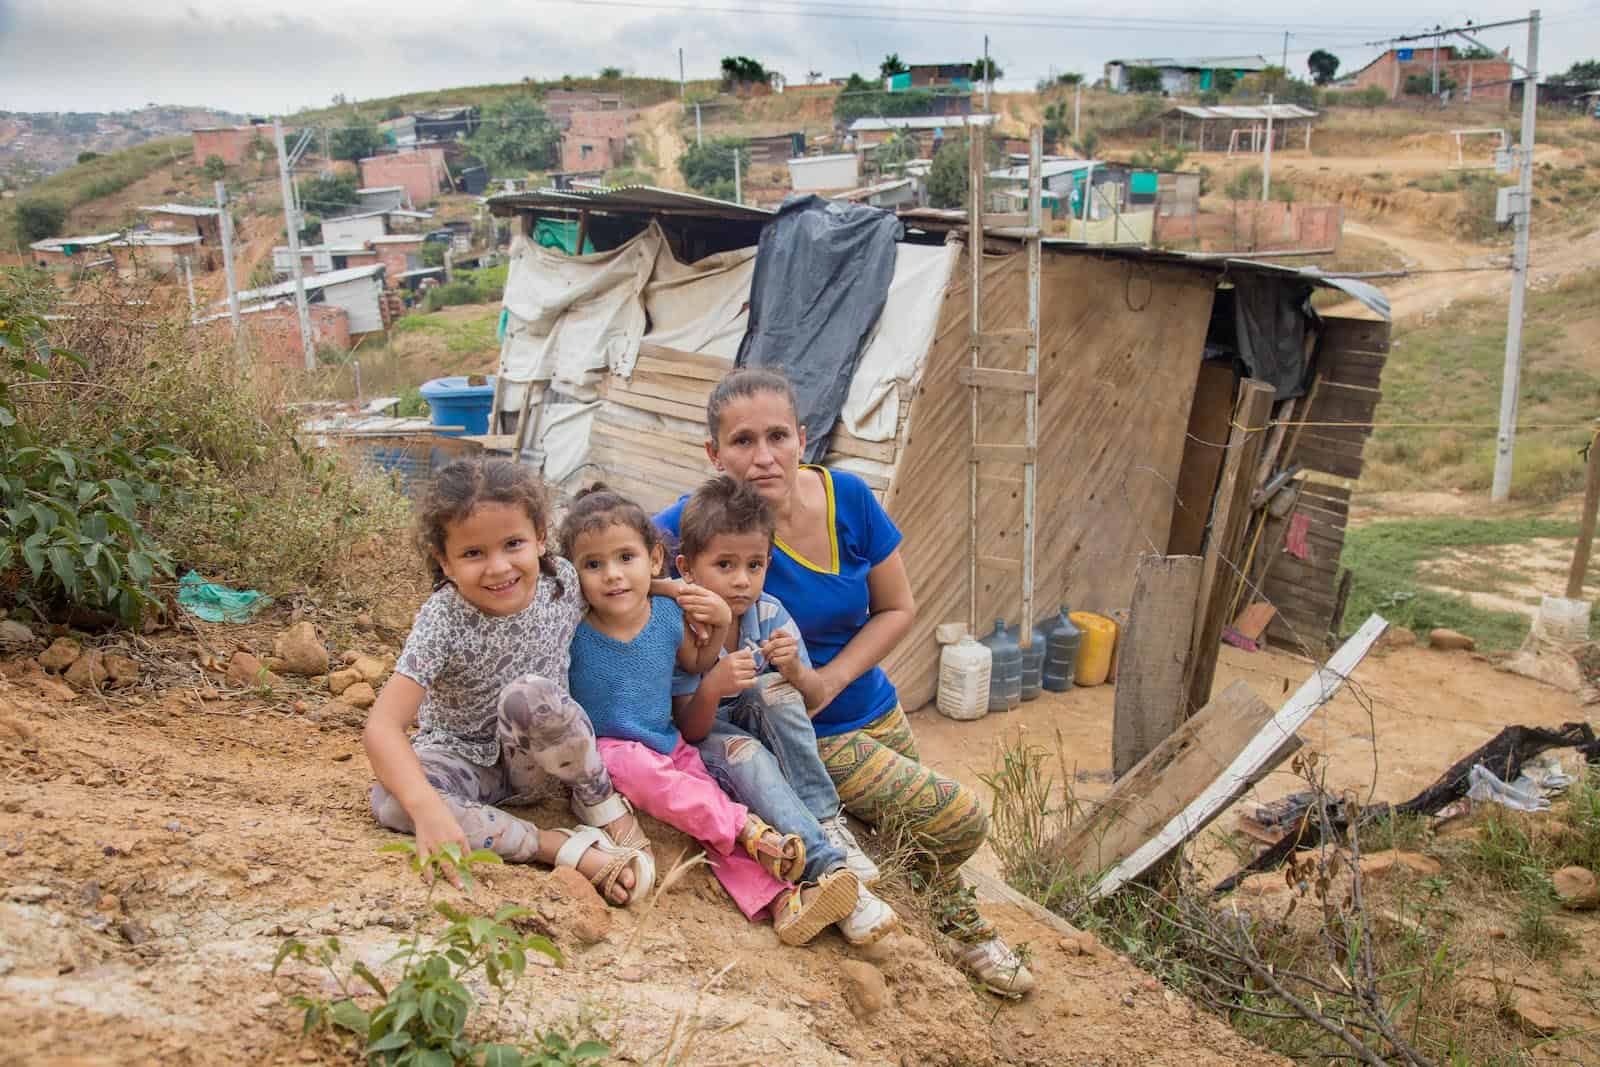 A woman and three children sit outside of a one-room home made of wood and plastic tarps where they are housing people who have left Venezuela after the political crisis.